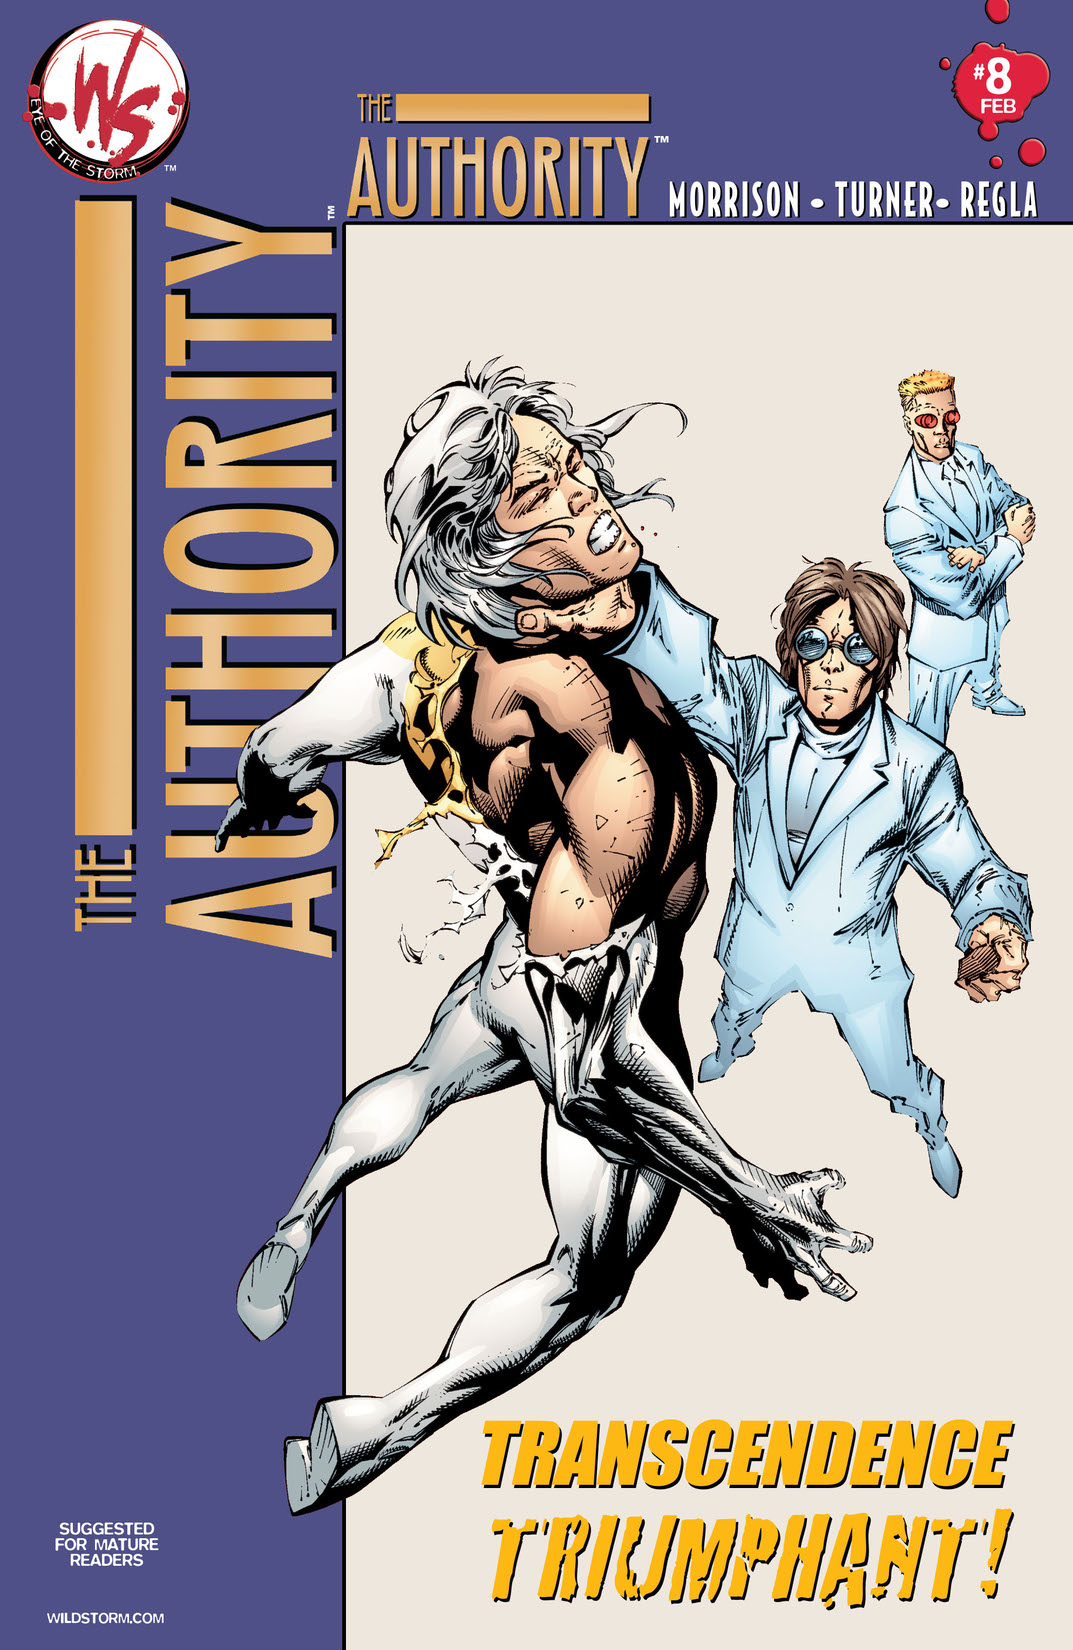 The Authority (2003-2004) #8 preview images